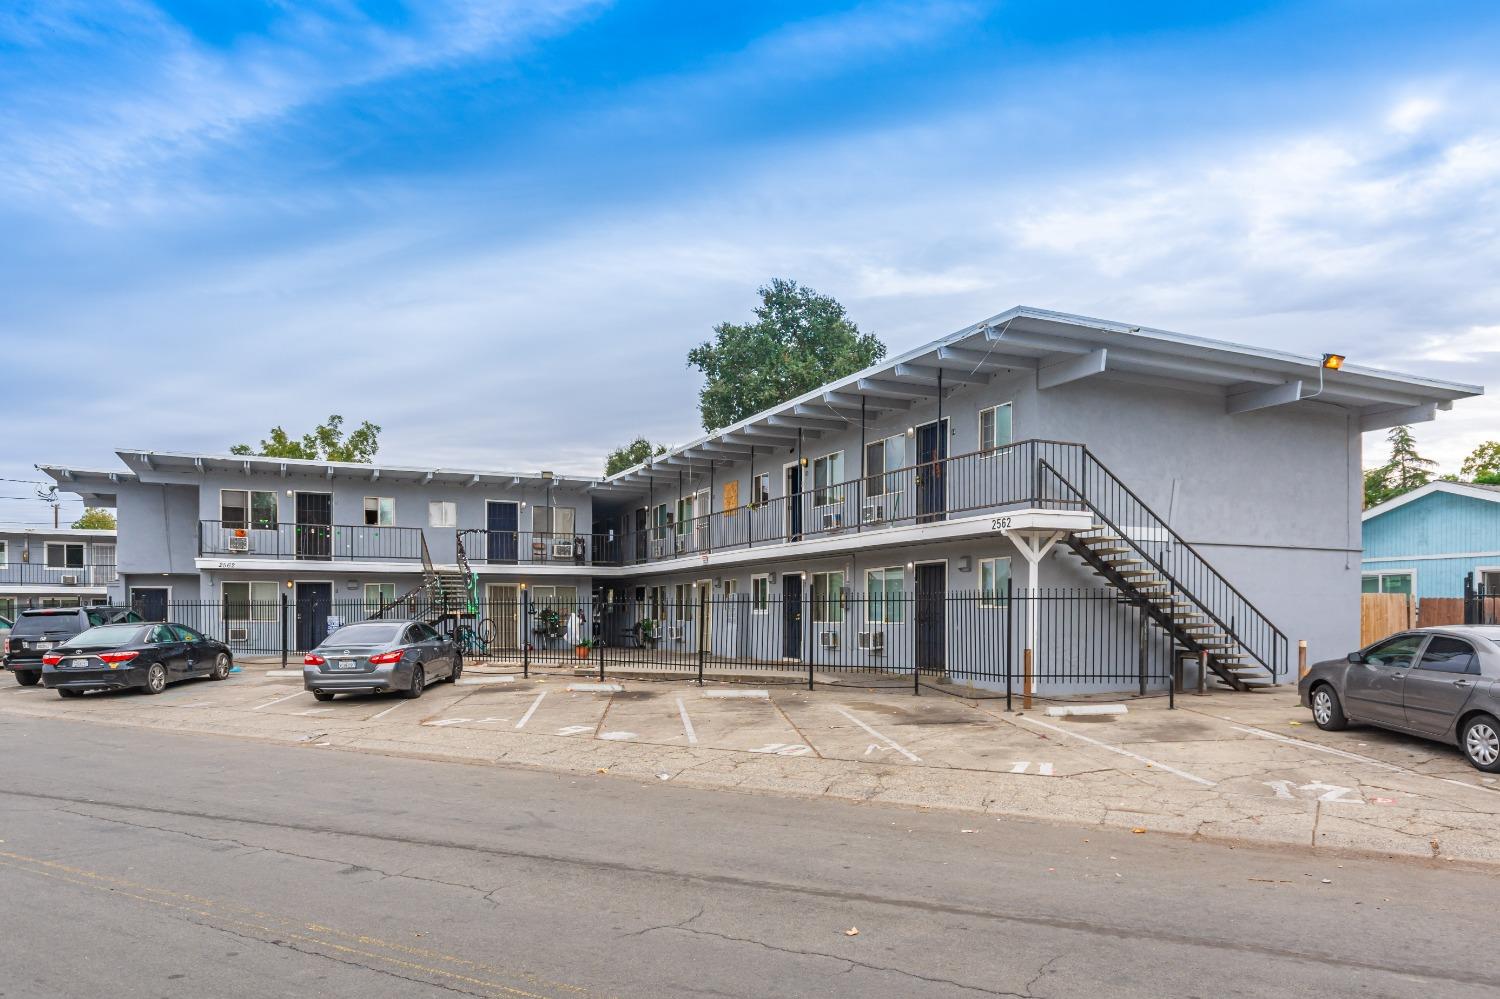 Photo of 2562-2570 Traction Ave in Sacramento, CA